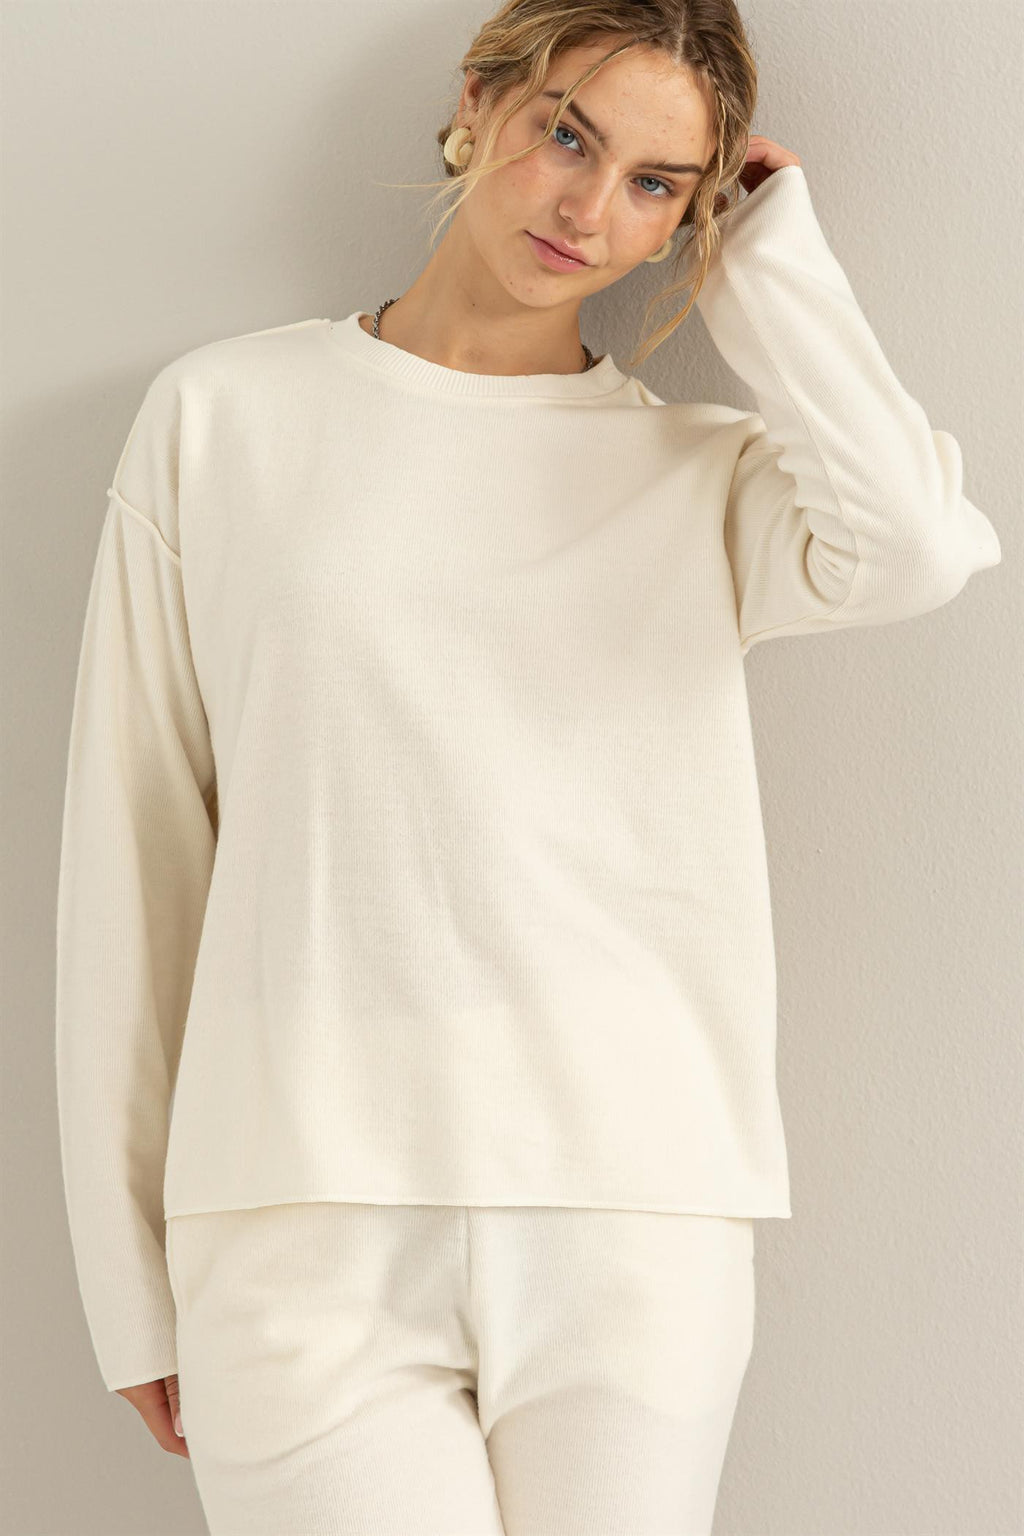 NOT YOUR GIRL REVERSE SEAM LONG SLEEVE TOP